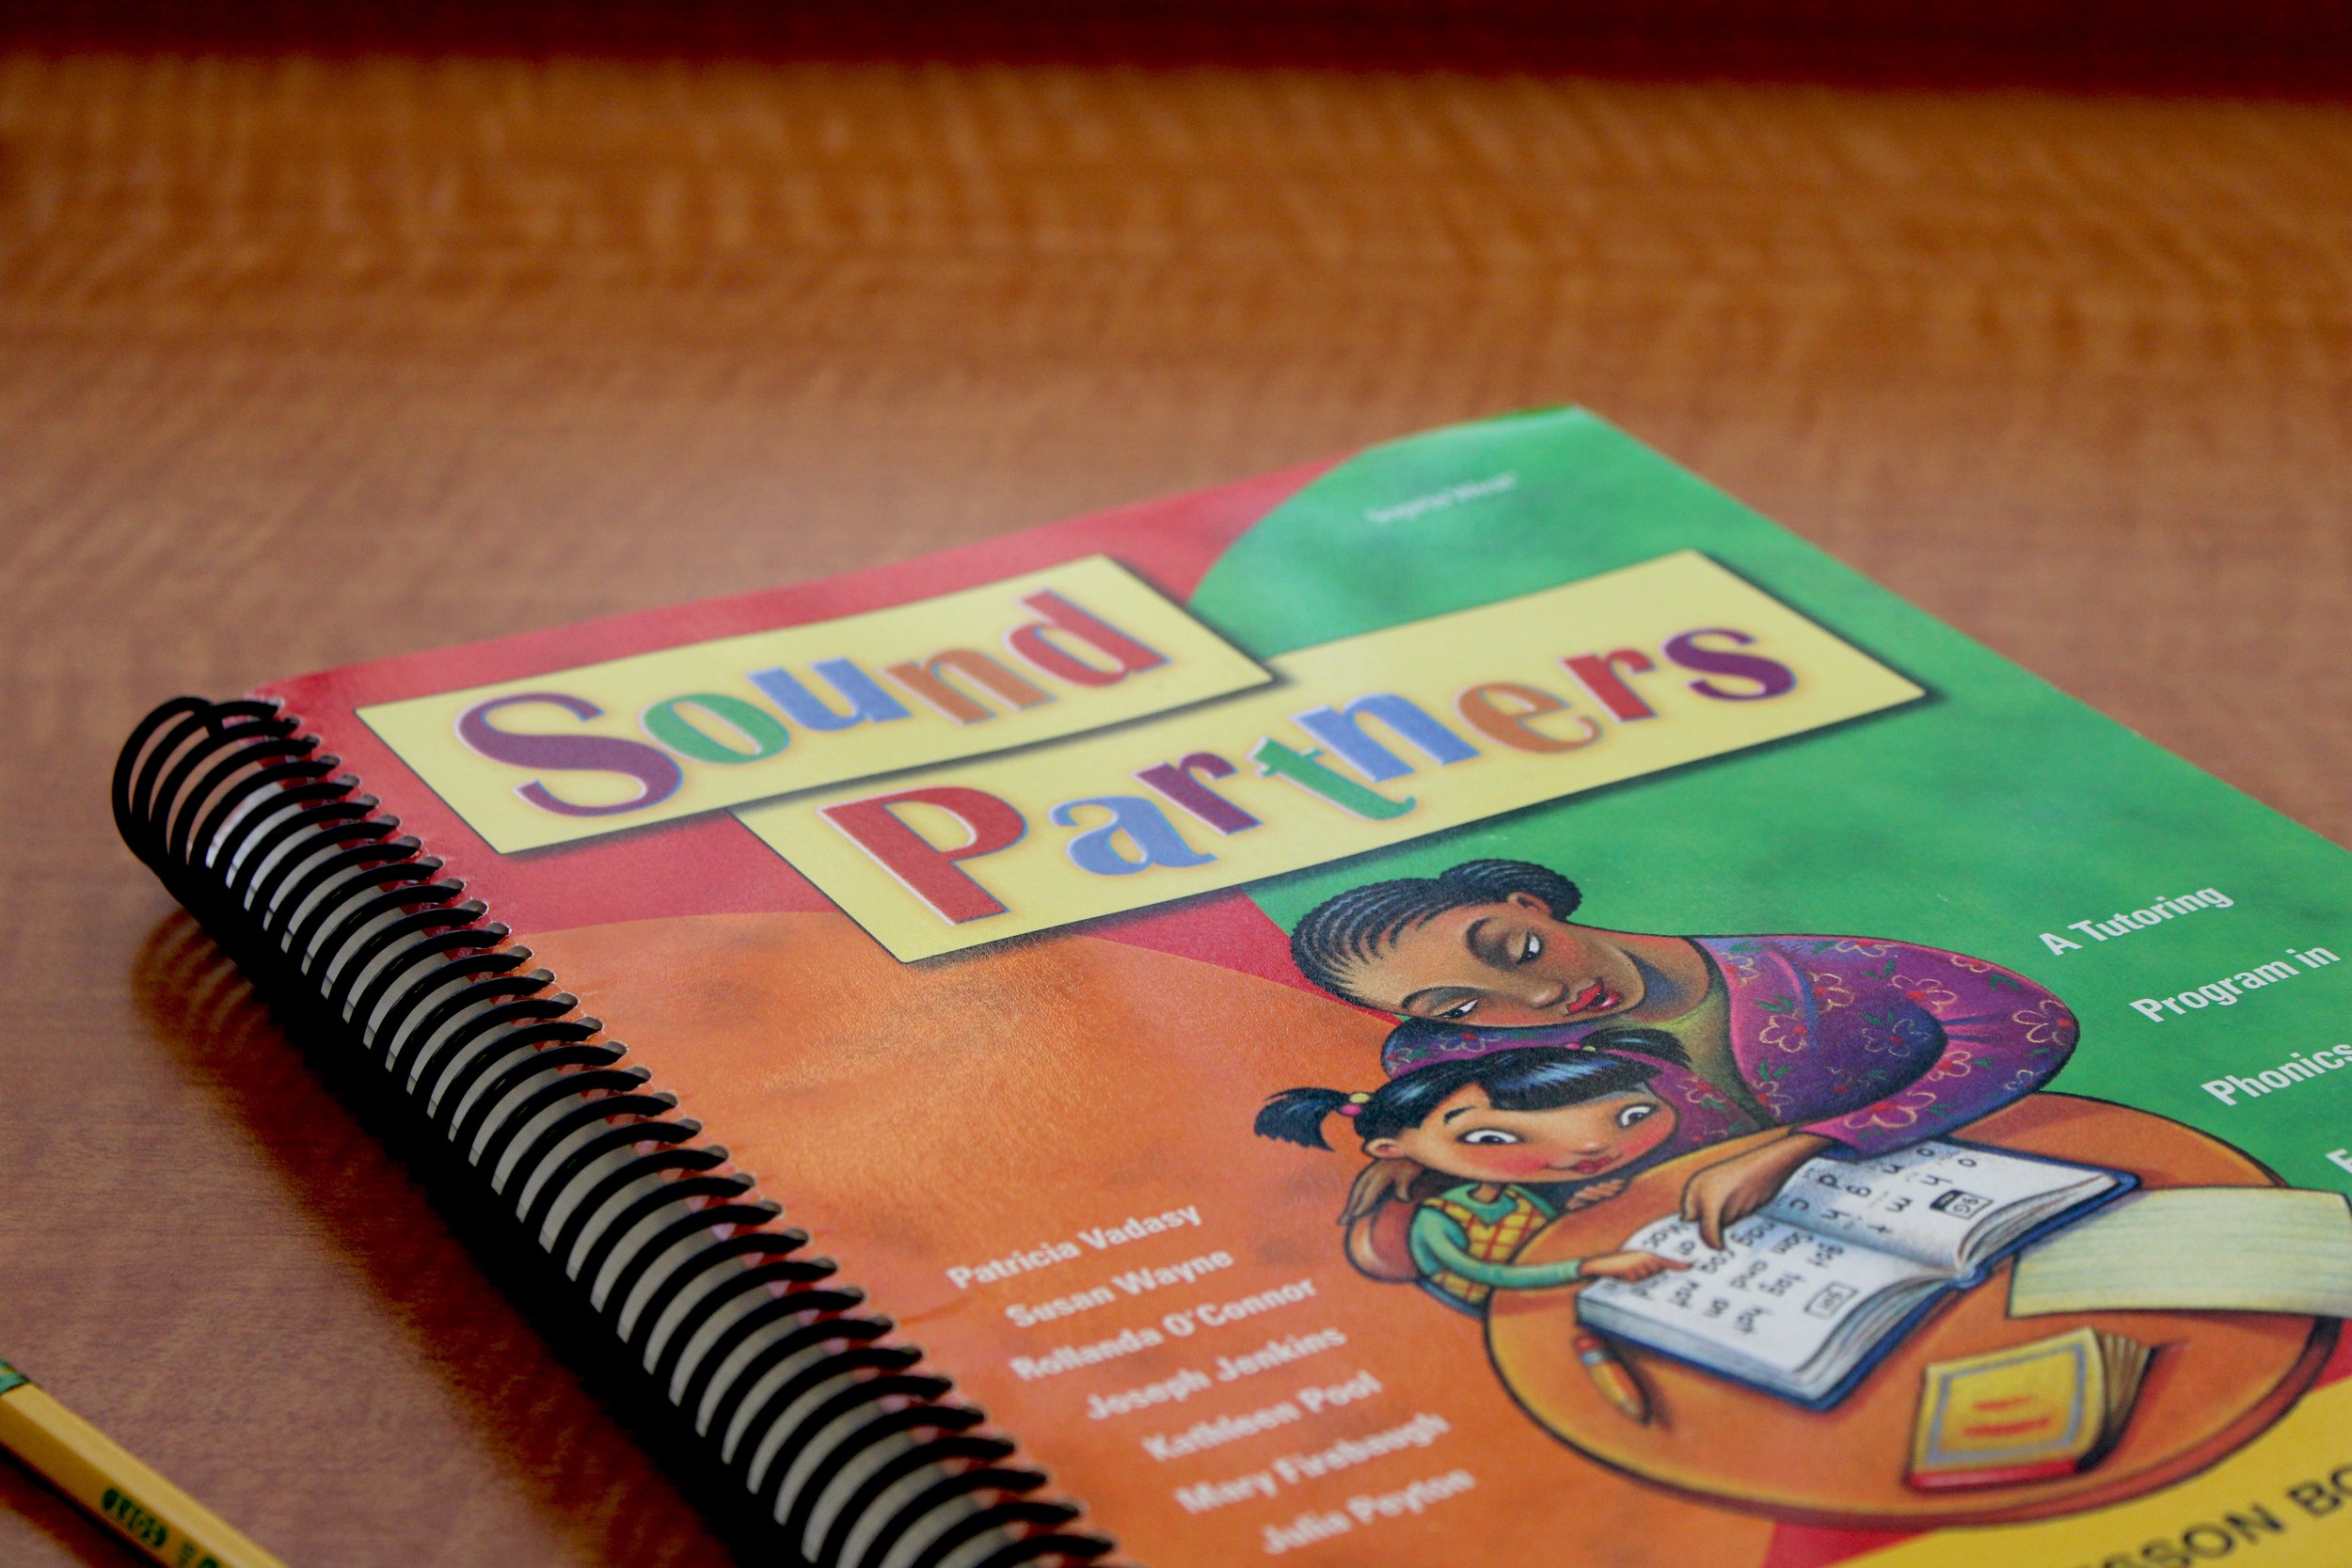 Sound Partners is a research-based tutoring program that provides individual instruction in early reading skills. (Voyager Sopris Learning)